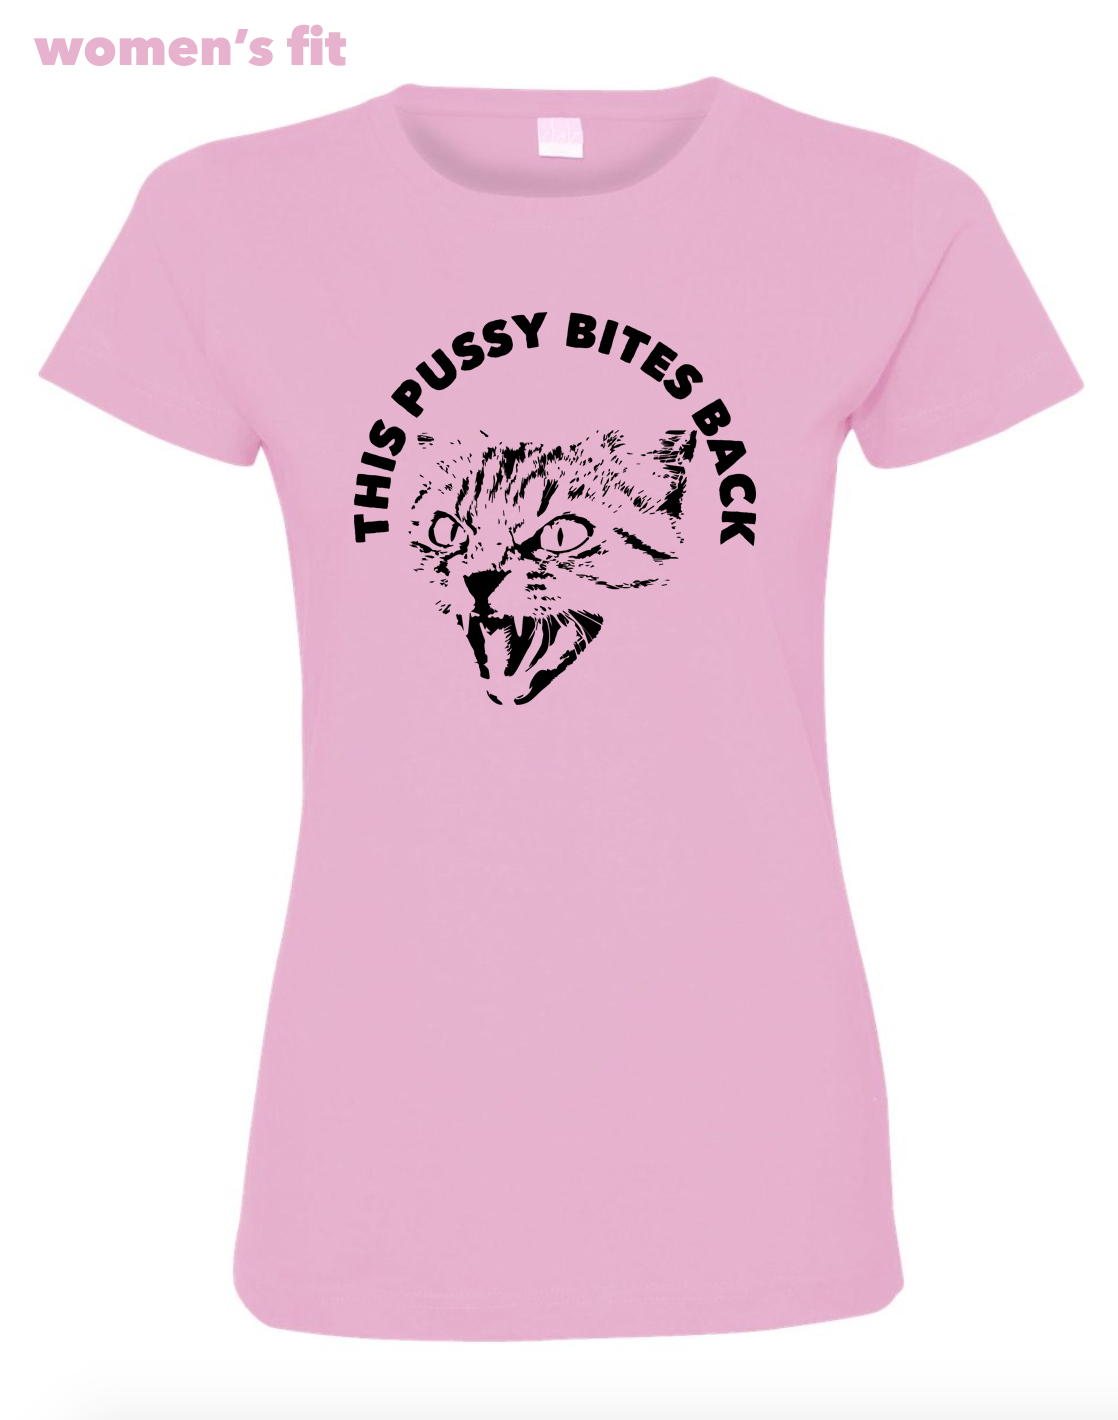 The Pussy Bites Back Pink Shirt women's cut with Black Lettering #thispussybitesback